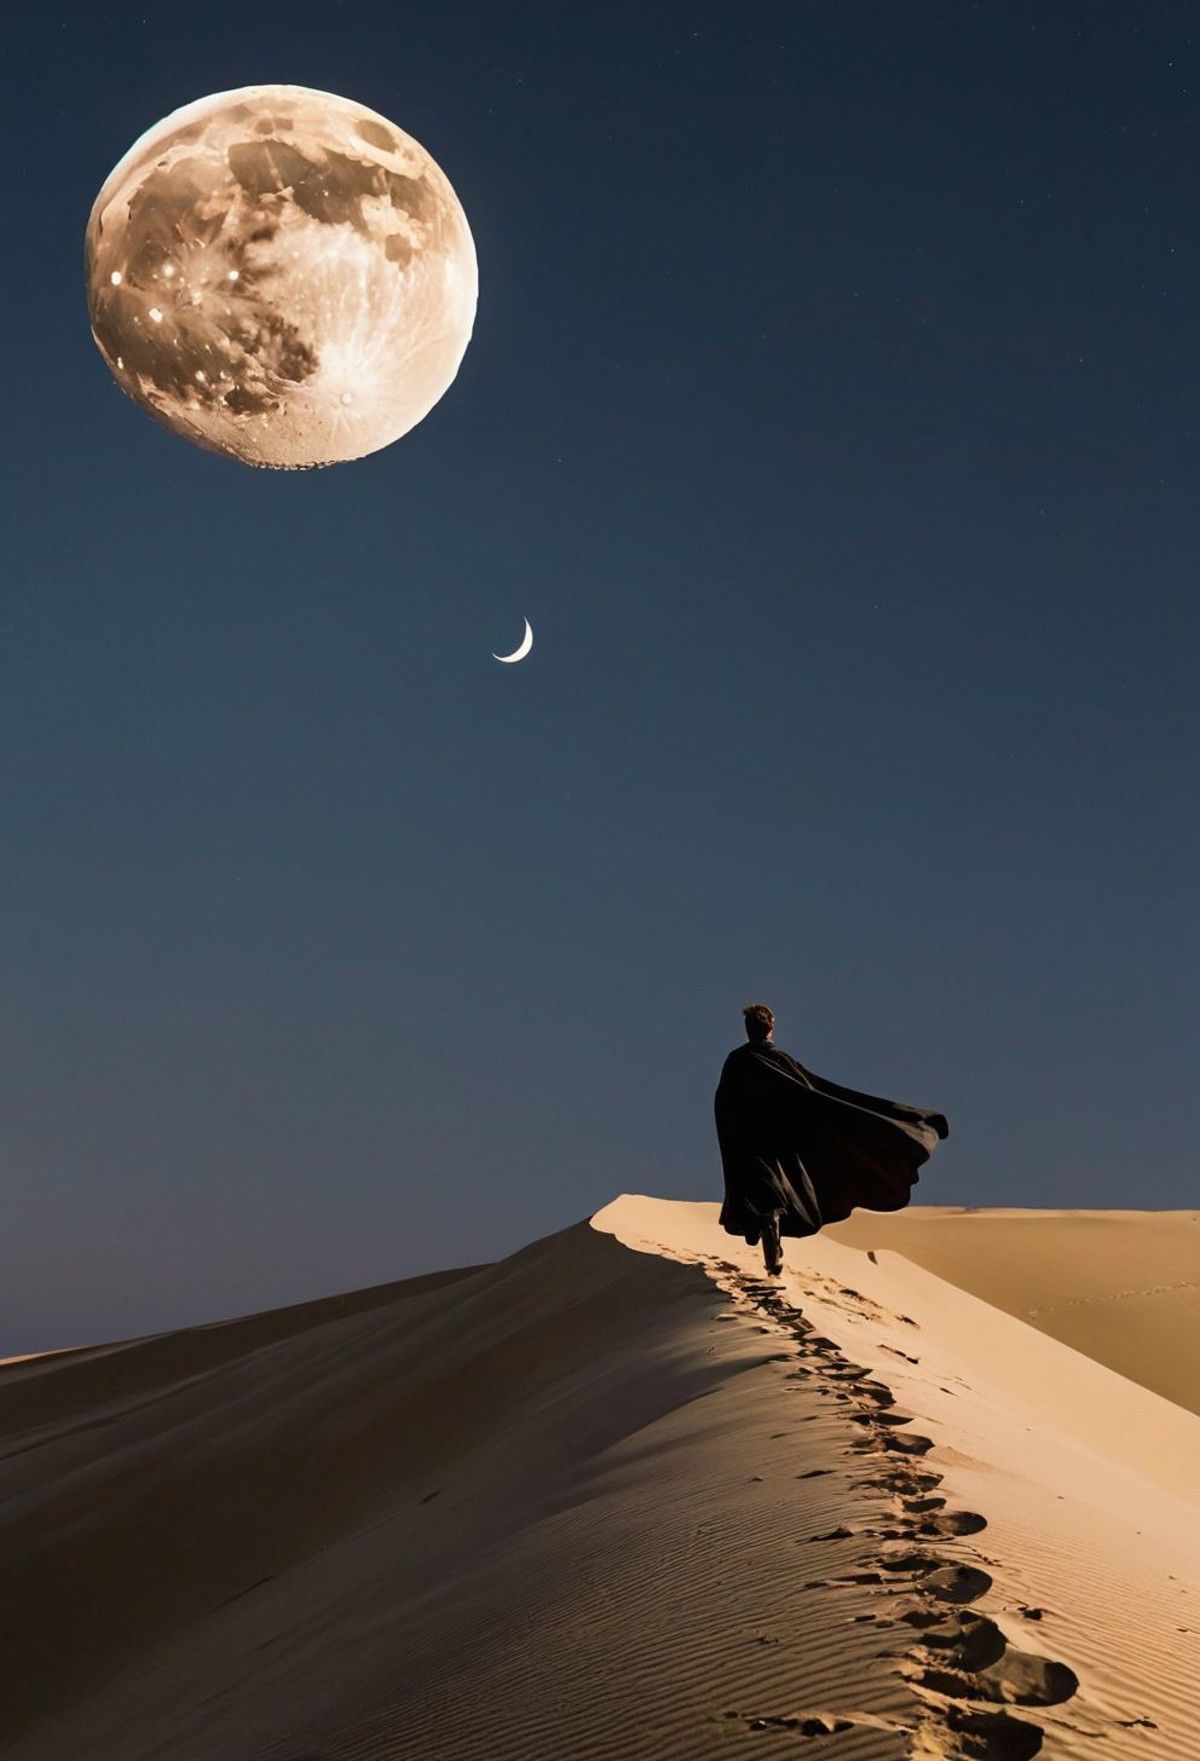 a man walking up a sand dune with a crescent moon in the background. The man is wearing a cape and appears to be in motion...